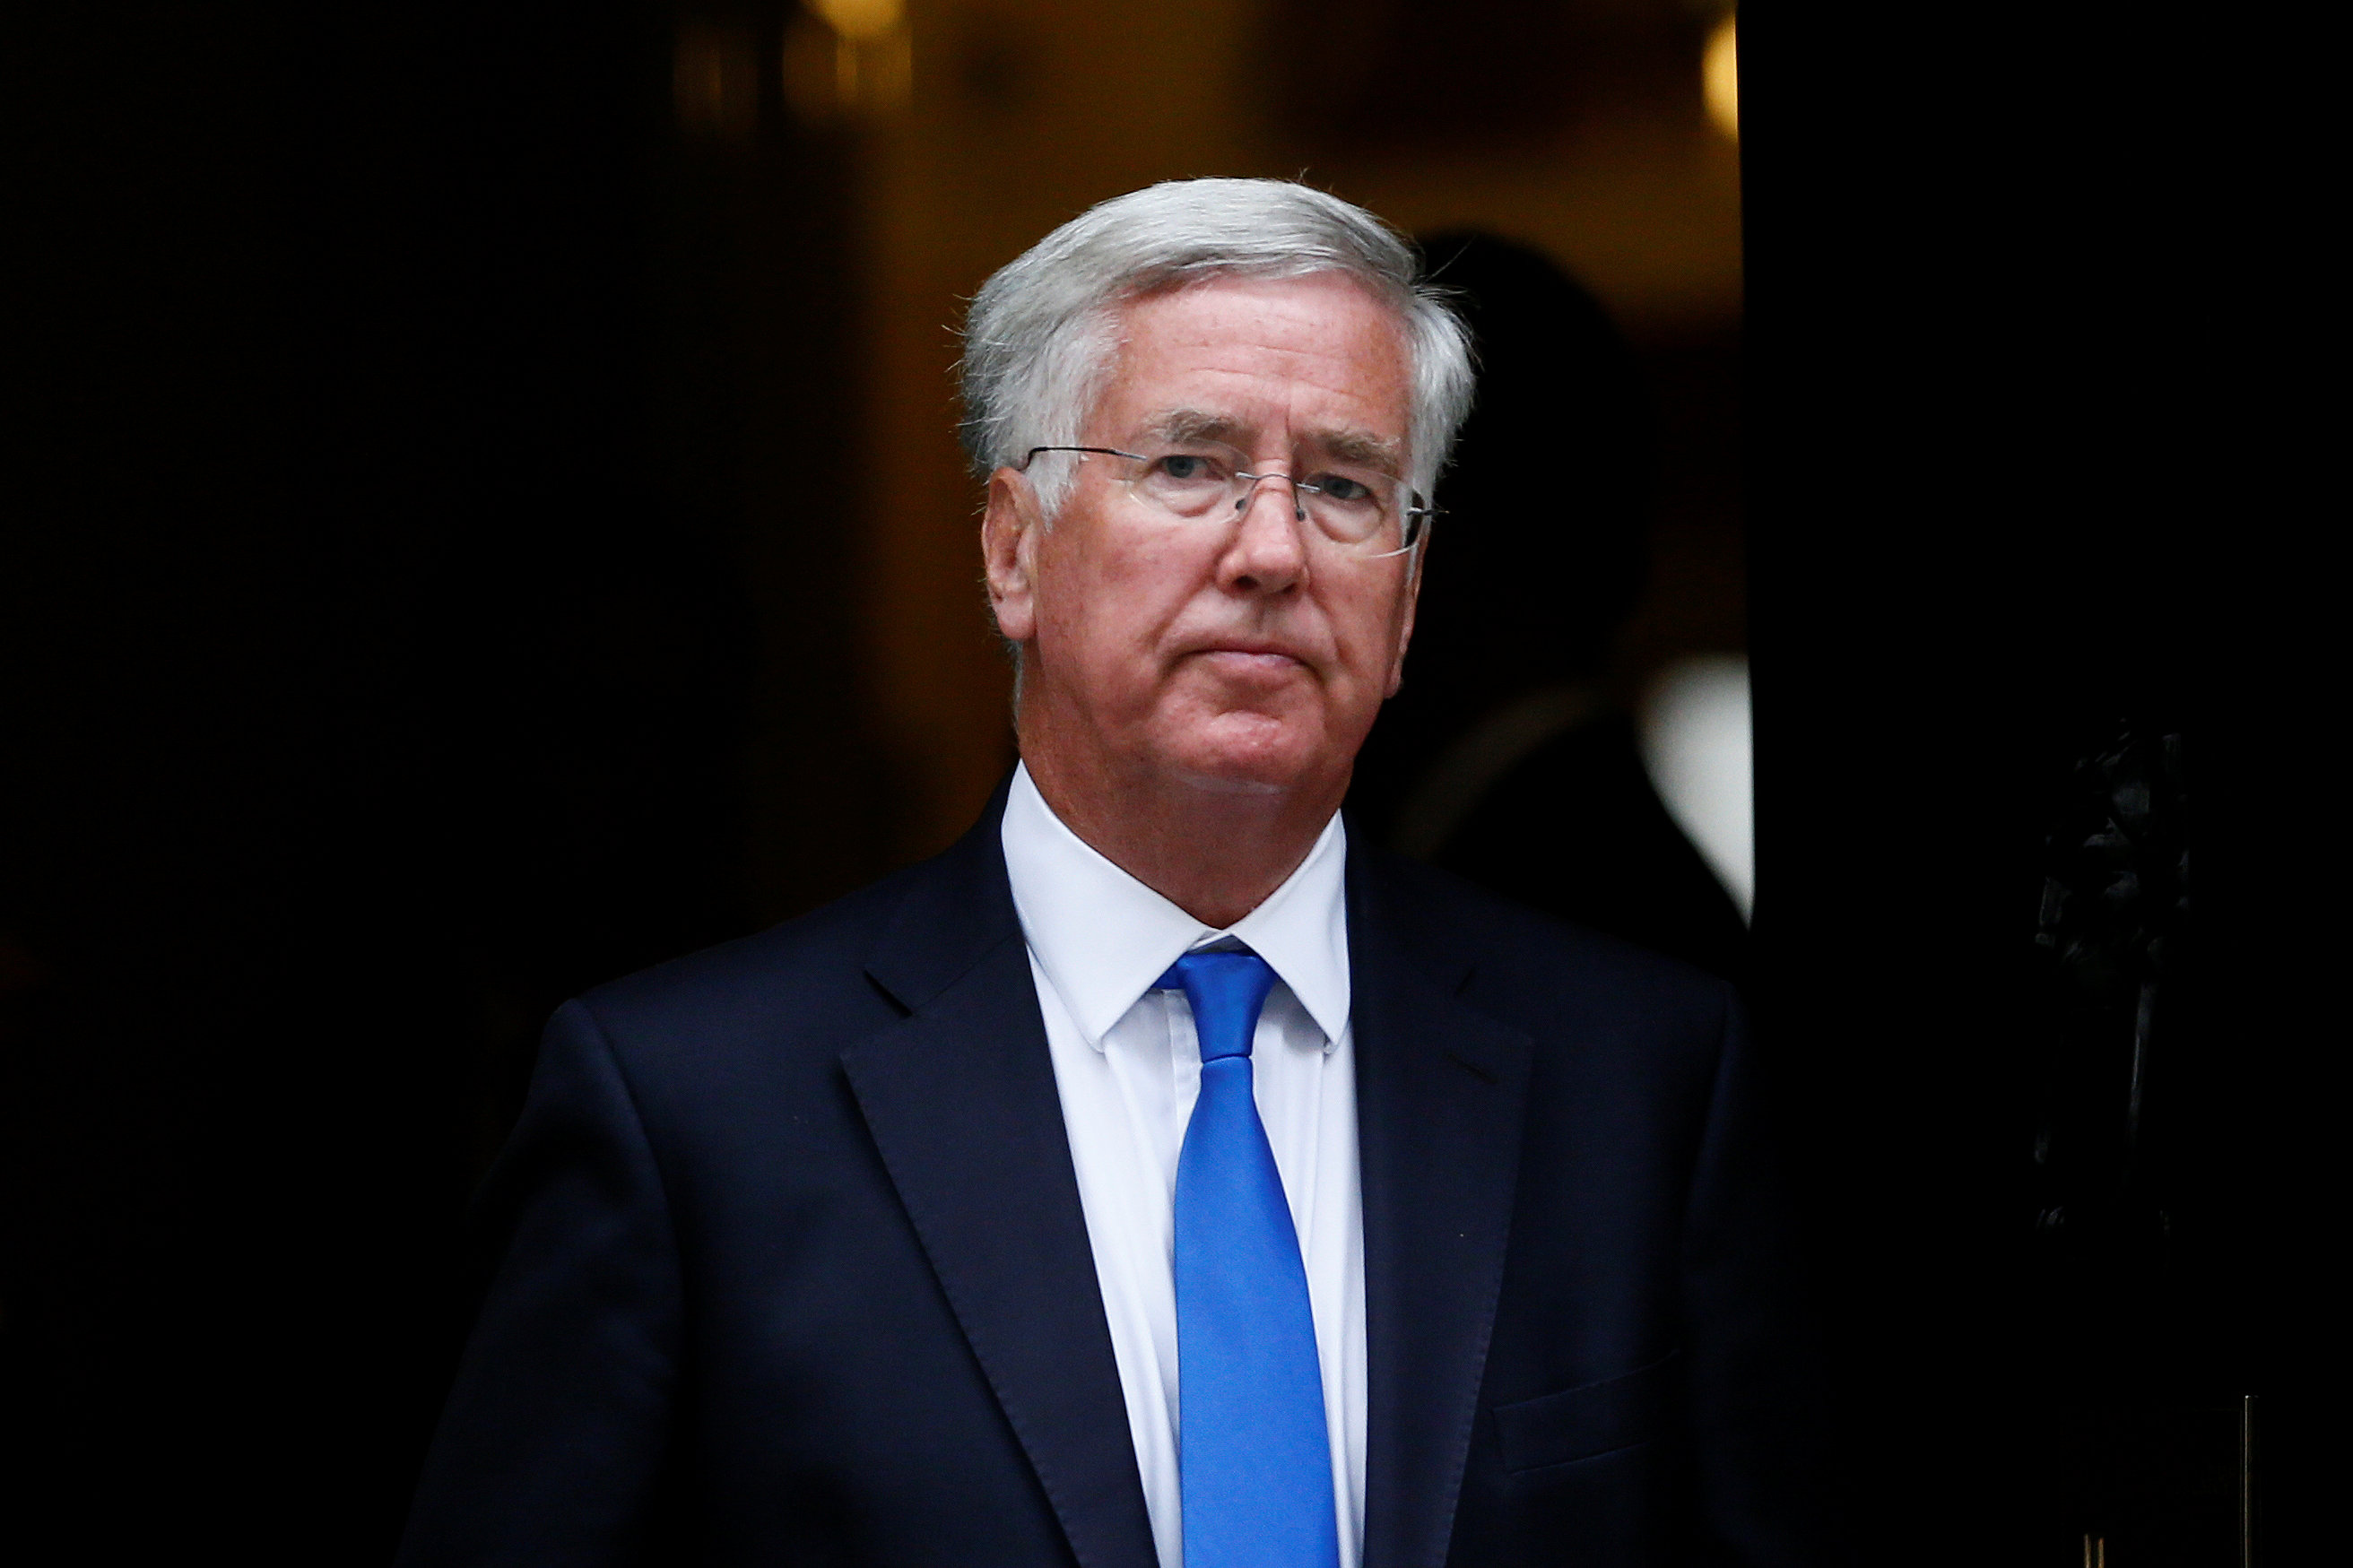 Britain's Secretary of State for Defence Michael Fallon leaves after attending a cabinet meeting at Number 10 Downing Street in London, Britain September 8, 2015. (Stefan Wermuth / Reuters File Photo)